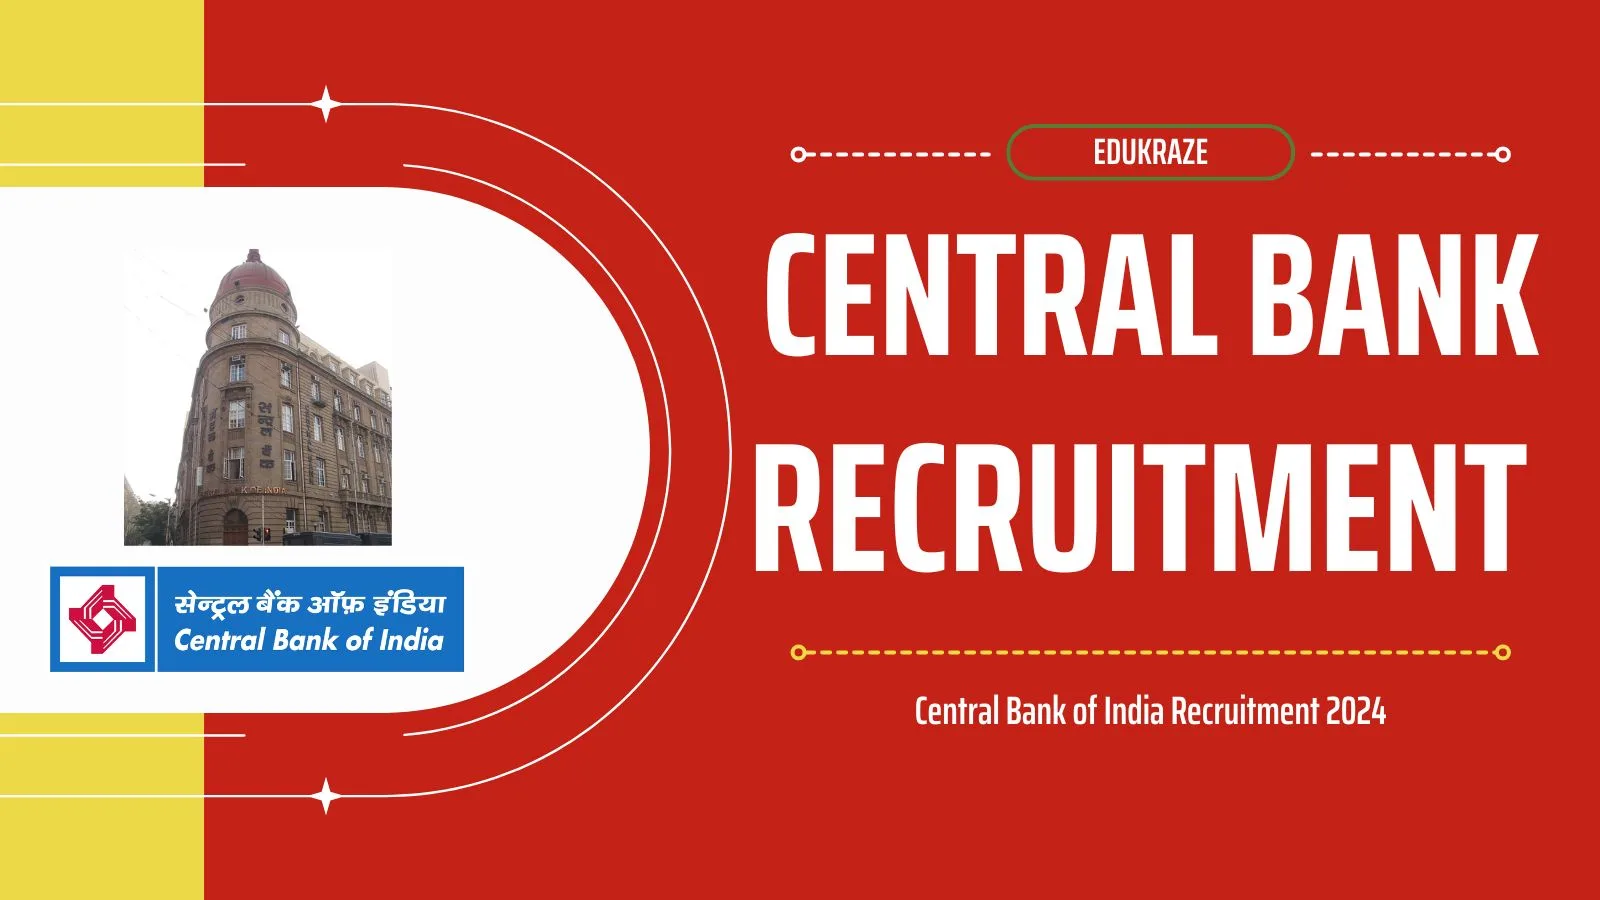 Central Bank of India Recruitment 2024: Apply Now for Faculty, Office Assistant, Attender, and Watchmen/Gardener Positions